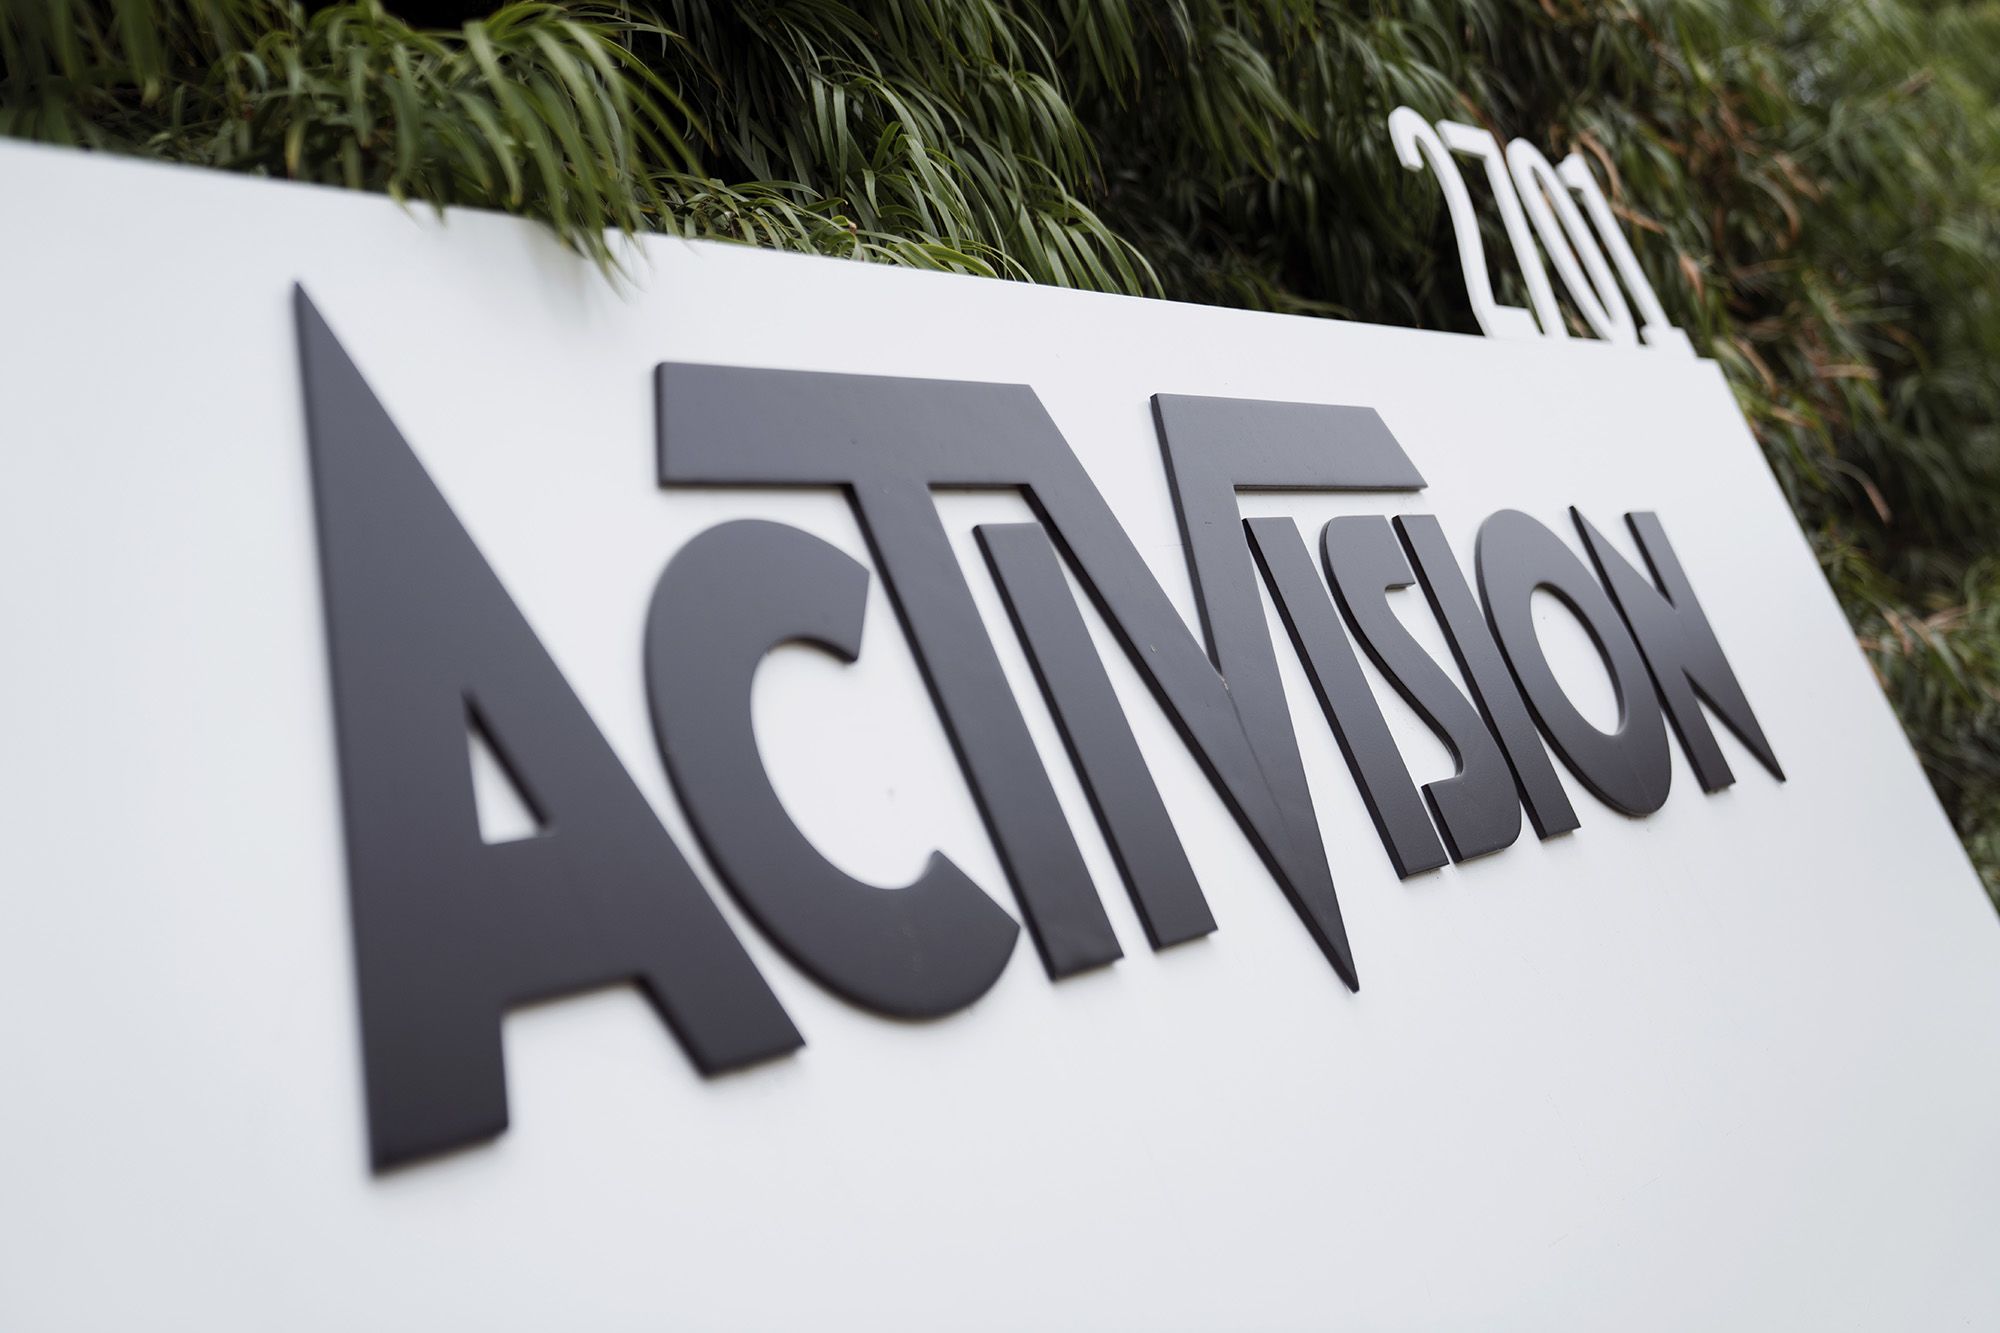 Microsoft and Activision Blizzard restructure proposed acquisition